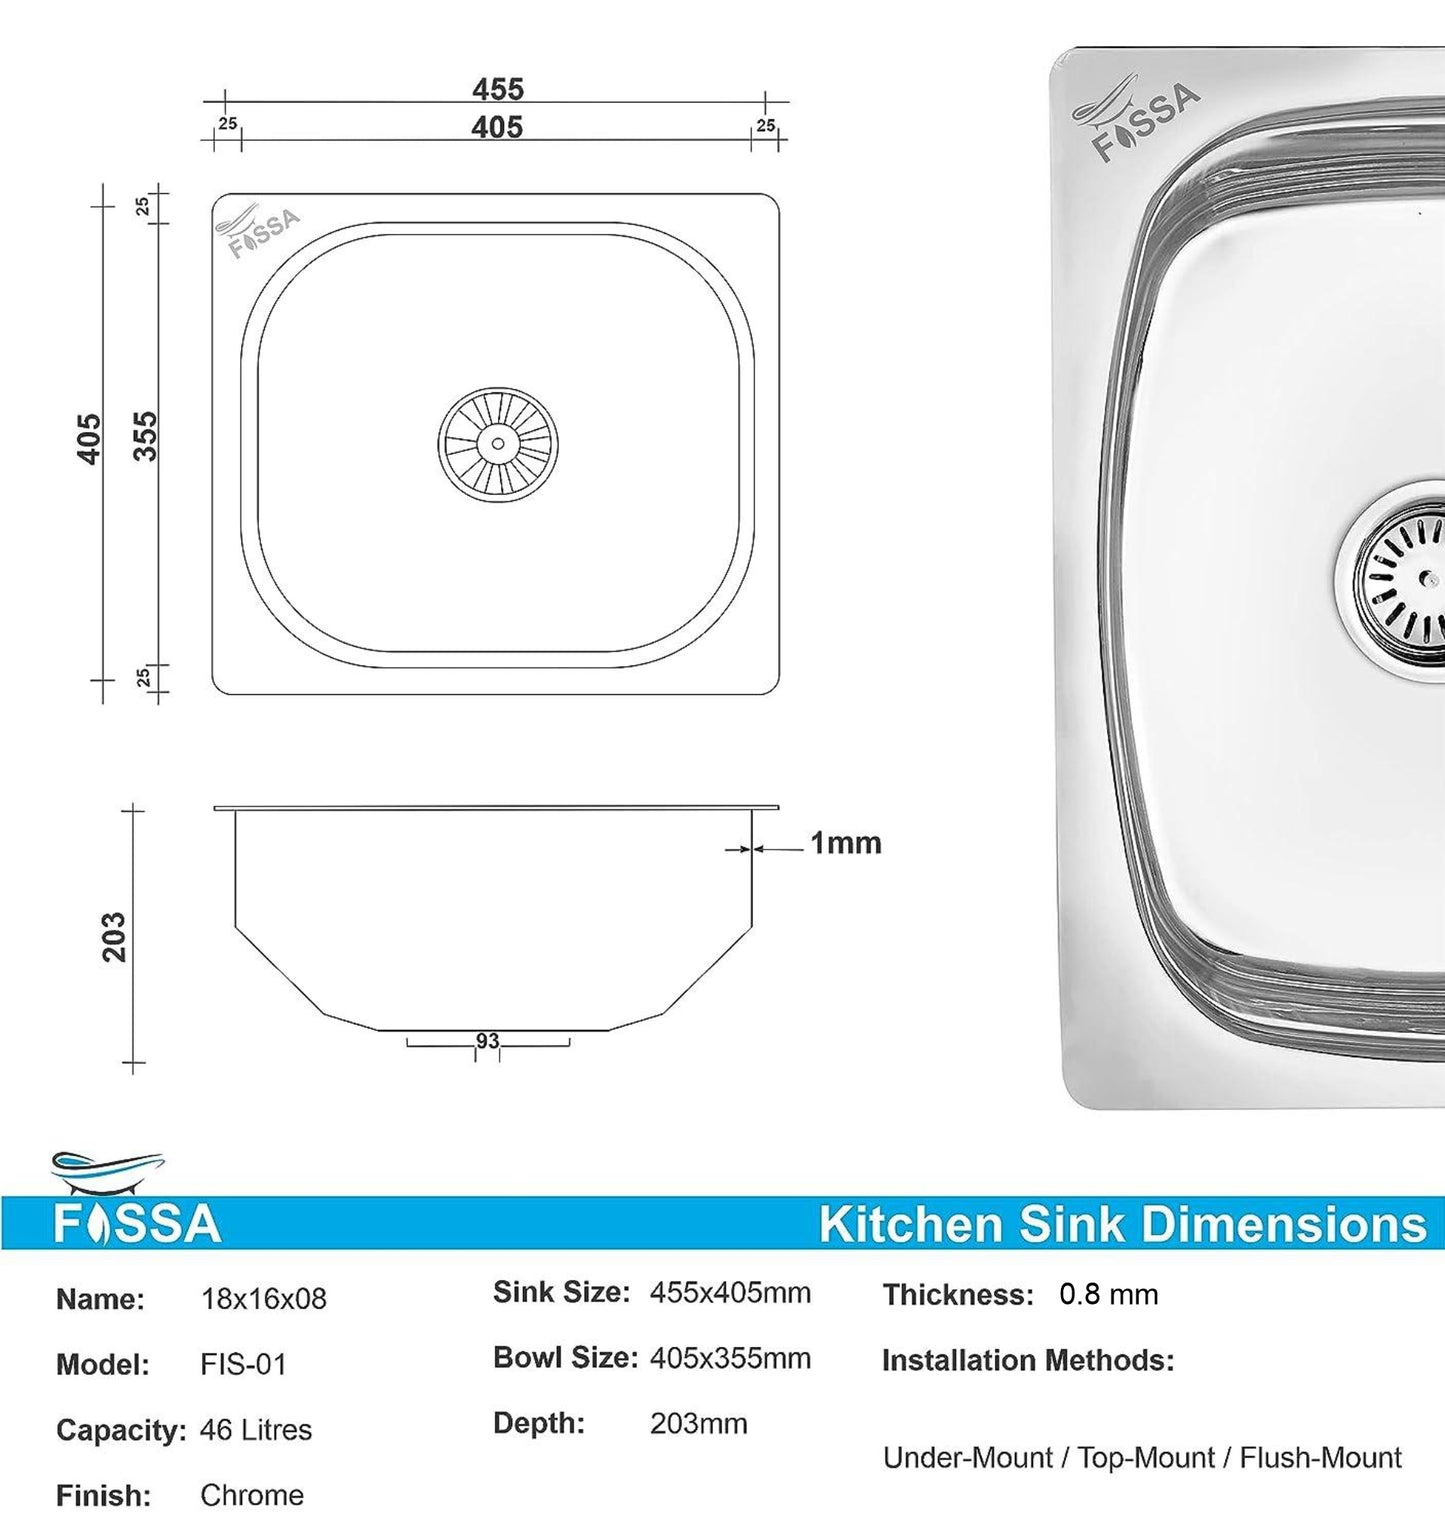 Fossa 18"x16"x08" inch Single Bowl Premium Stainless Steel Kitchen Sink With PVC Coupling Glossy Finish